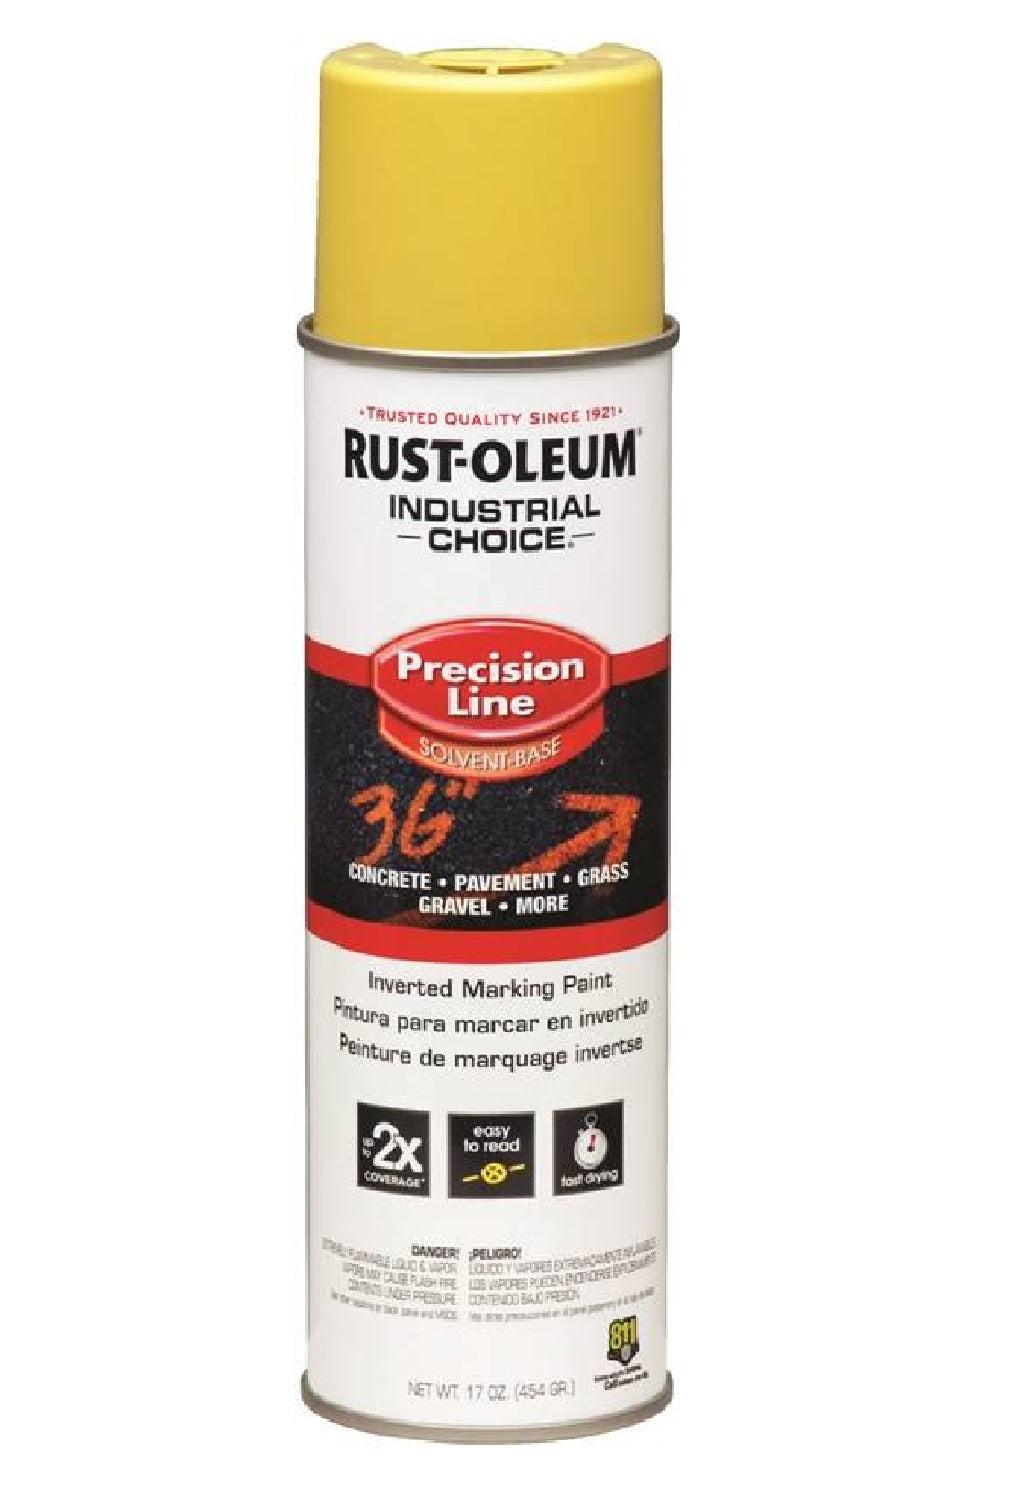 Rust-Oleum 203025V Industrial Choice Marking Paint, 17 Oz, Yellow